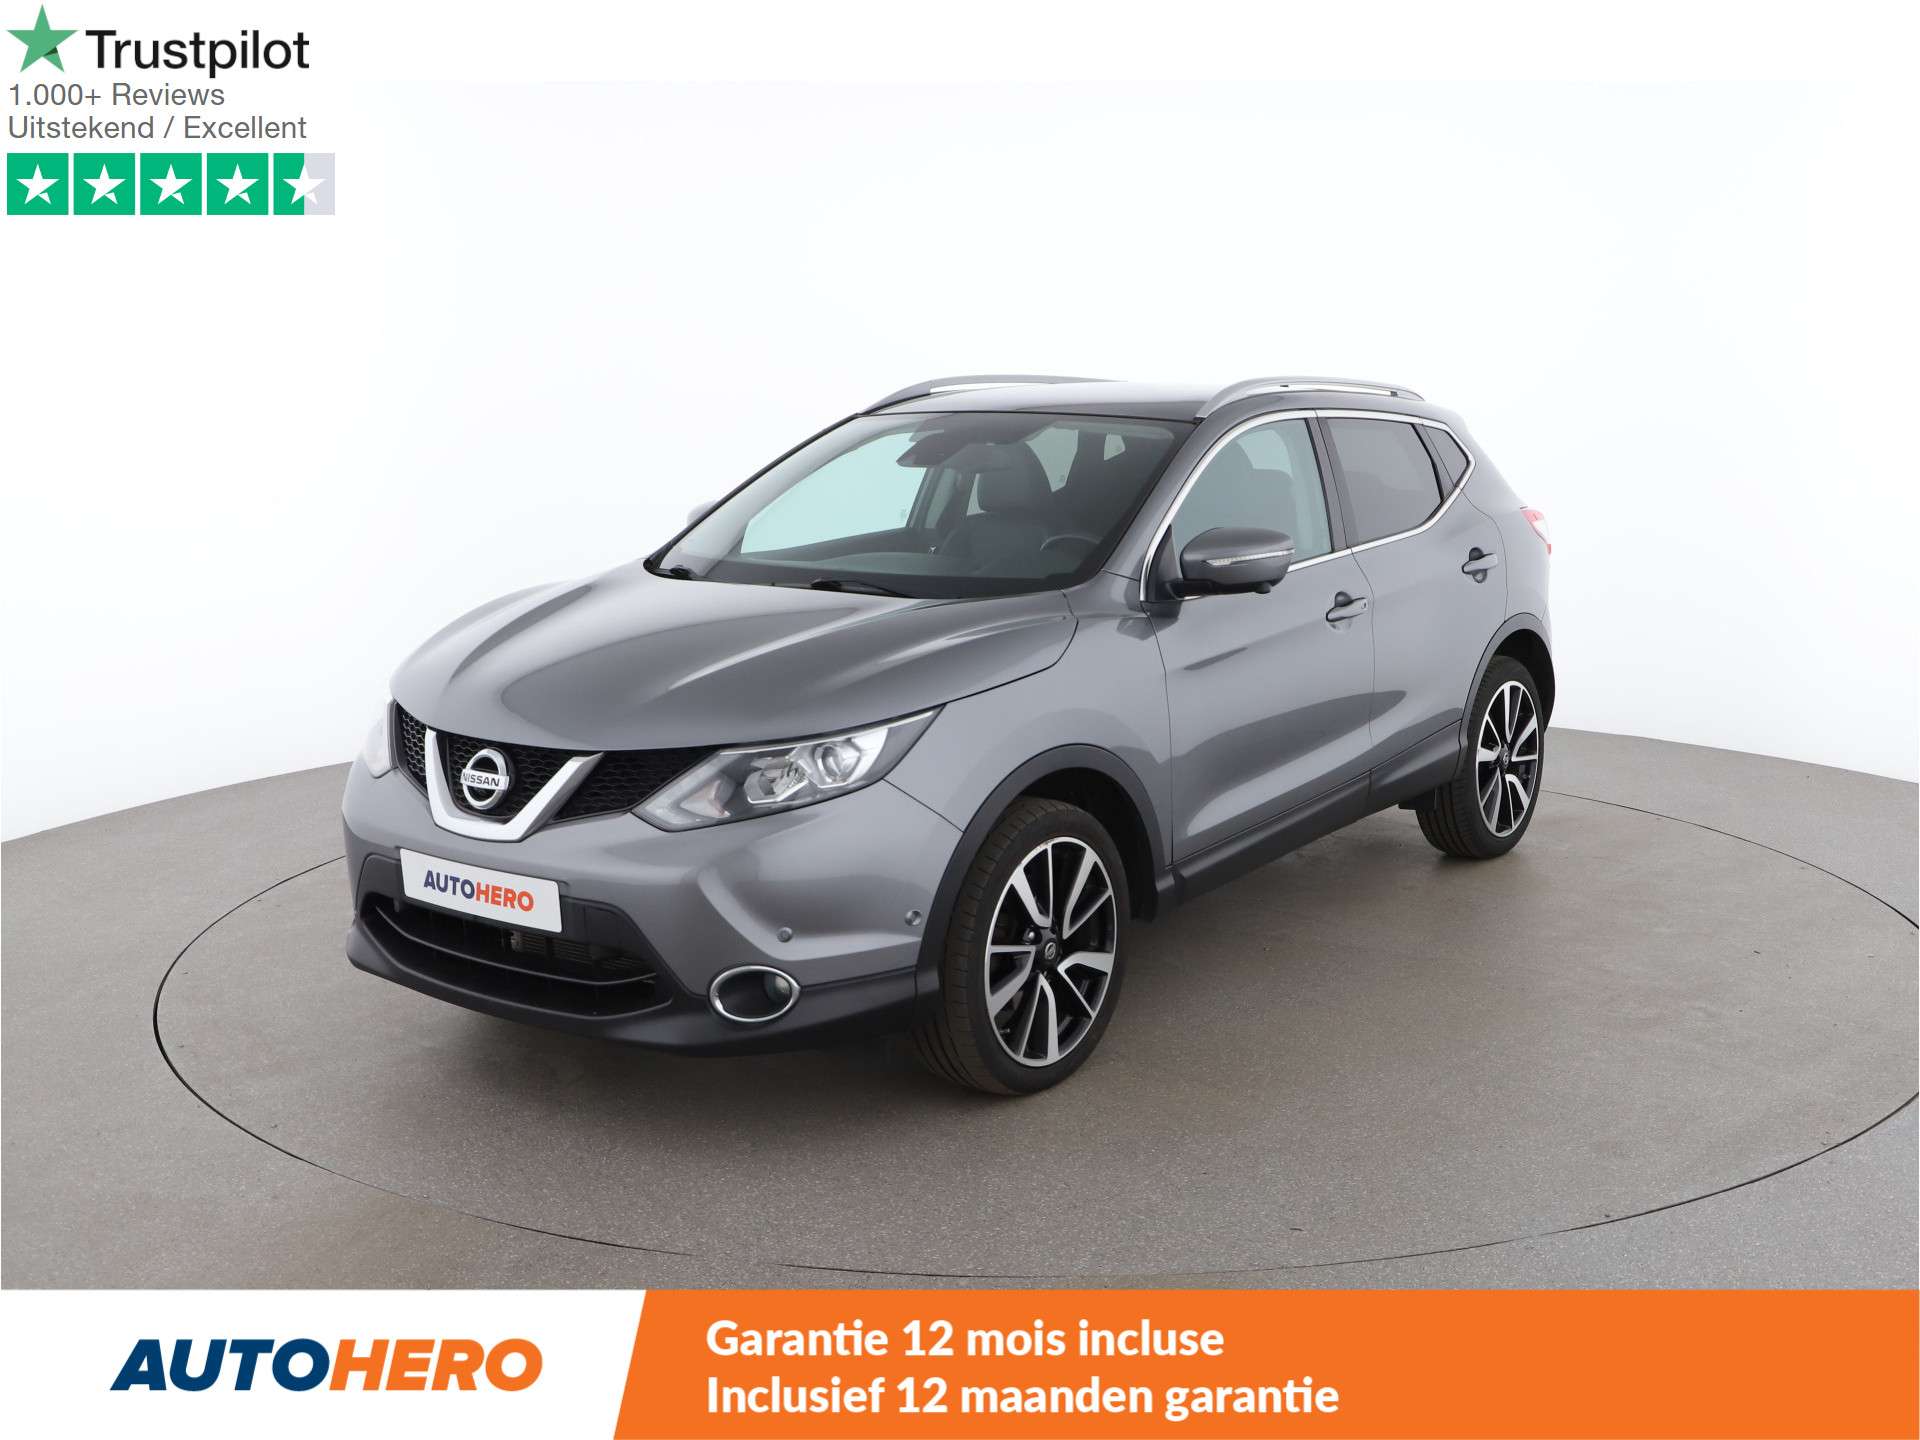 Nissan Qashqai Off-Road/Pick-up in Grey used in Brussel for € 14,050.-